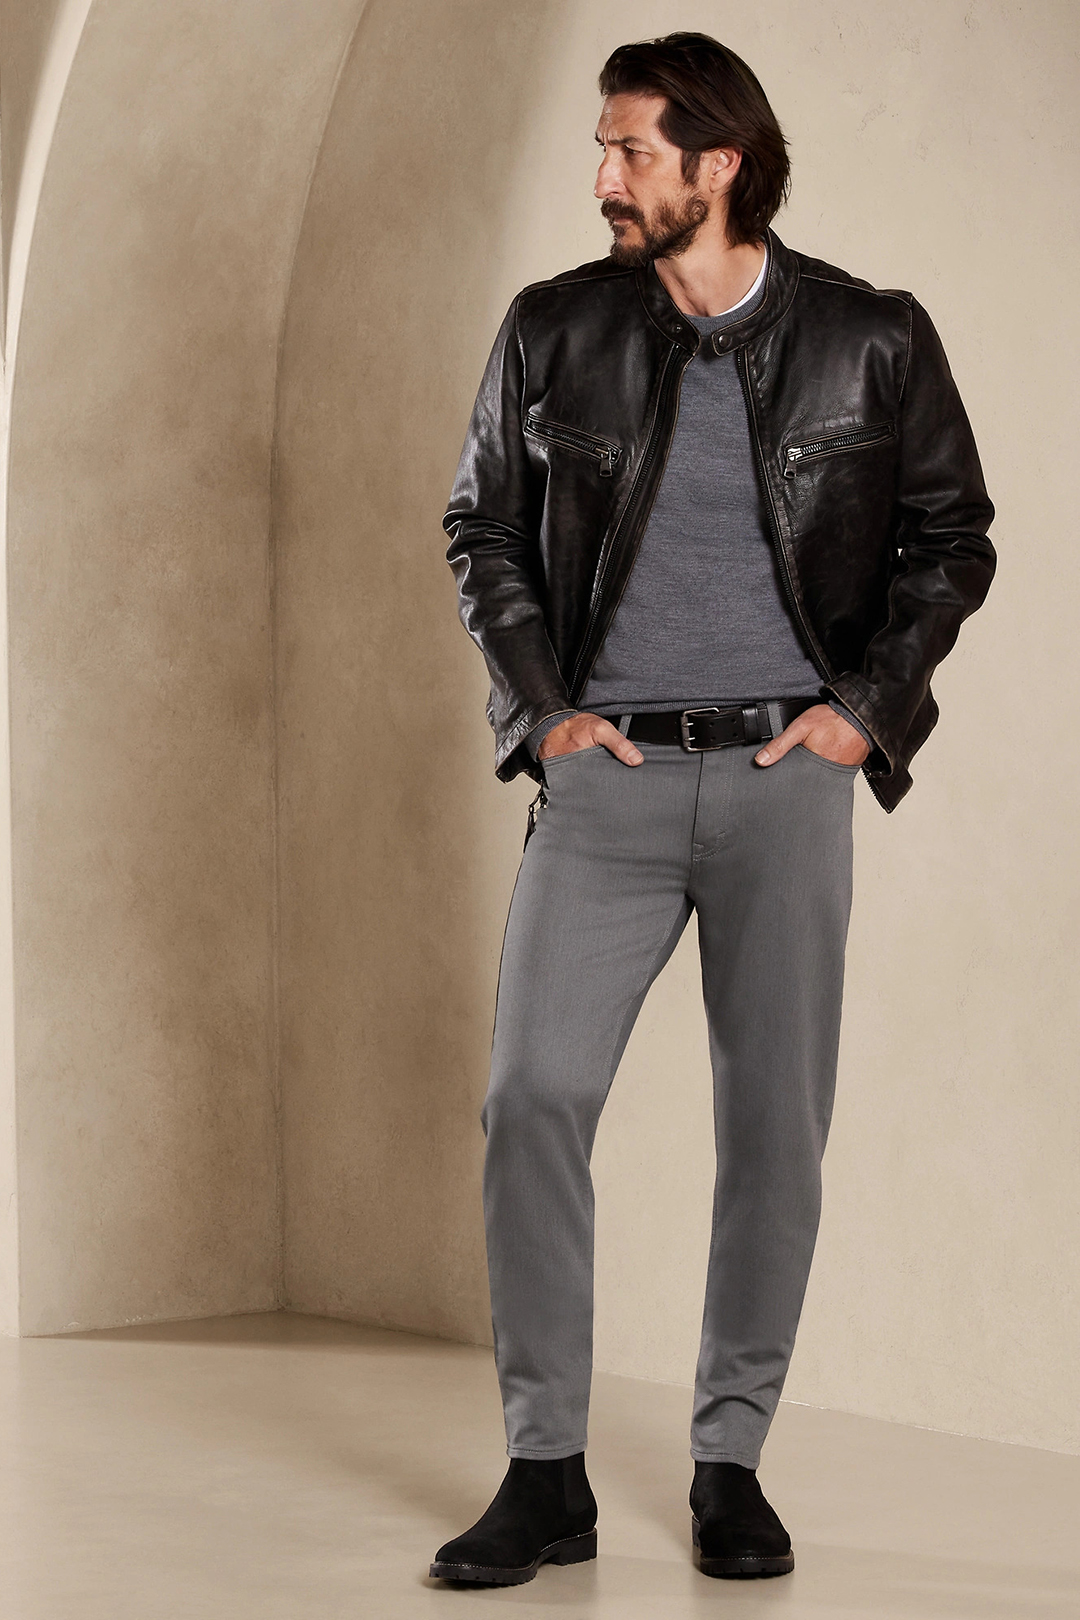 Black leather racer jacket, gray sweater, gray jeans, and black suede Chelsea boots outfit